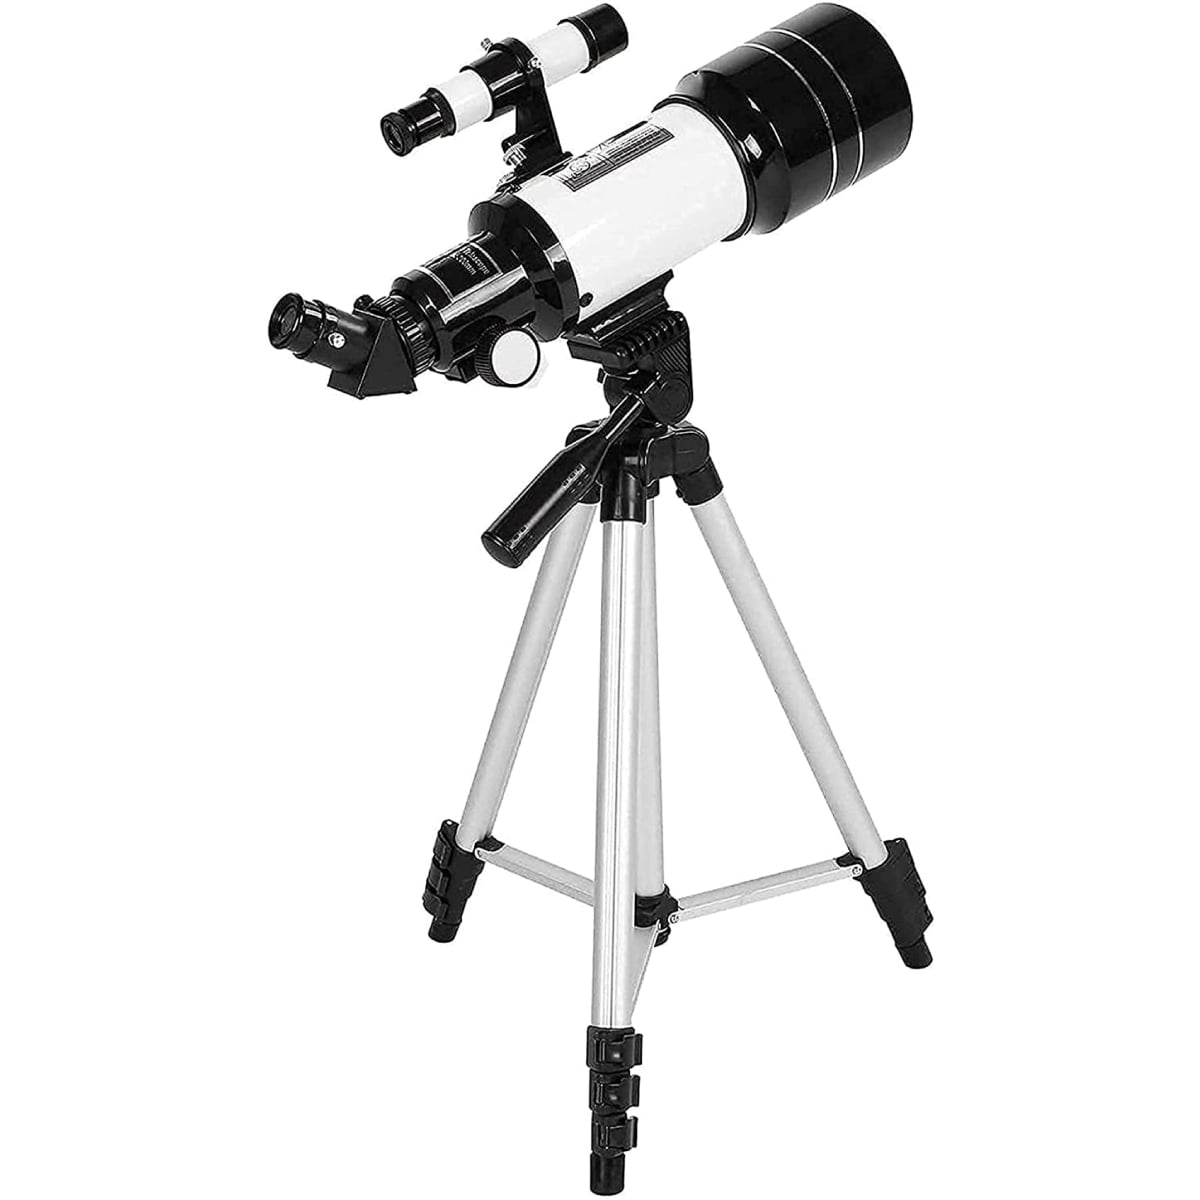 Ideal Space Gift Comes with A Complete Set of Accessories View Moon & Deep Space & Star High Light Transmittance Lens Telescopes for Adults 70mm Astronomy Refractor Telescope 